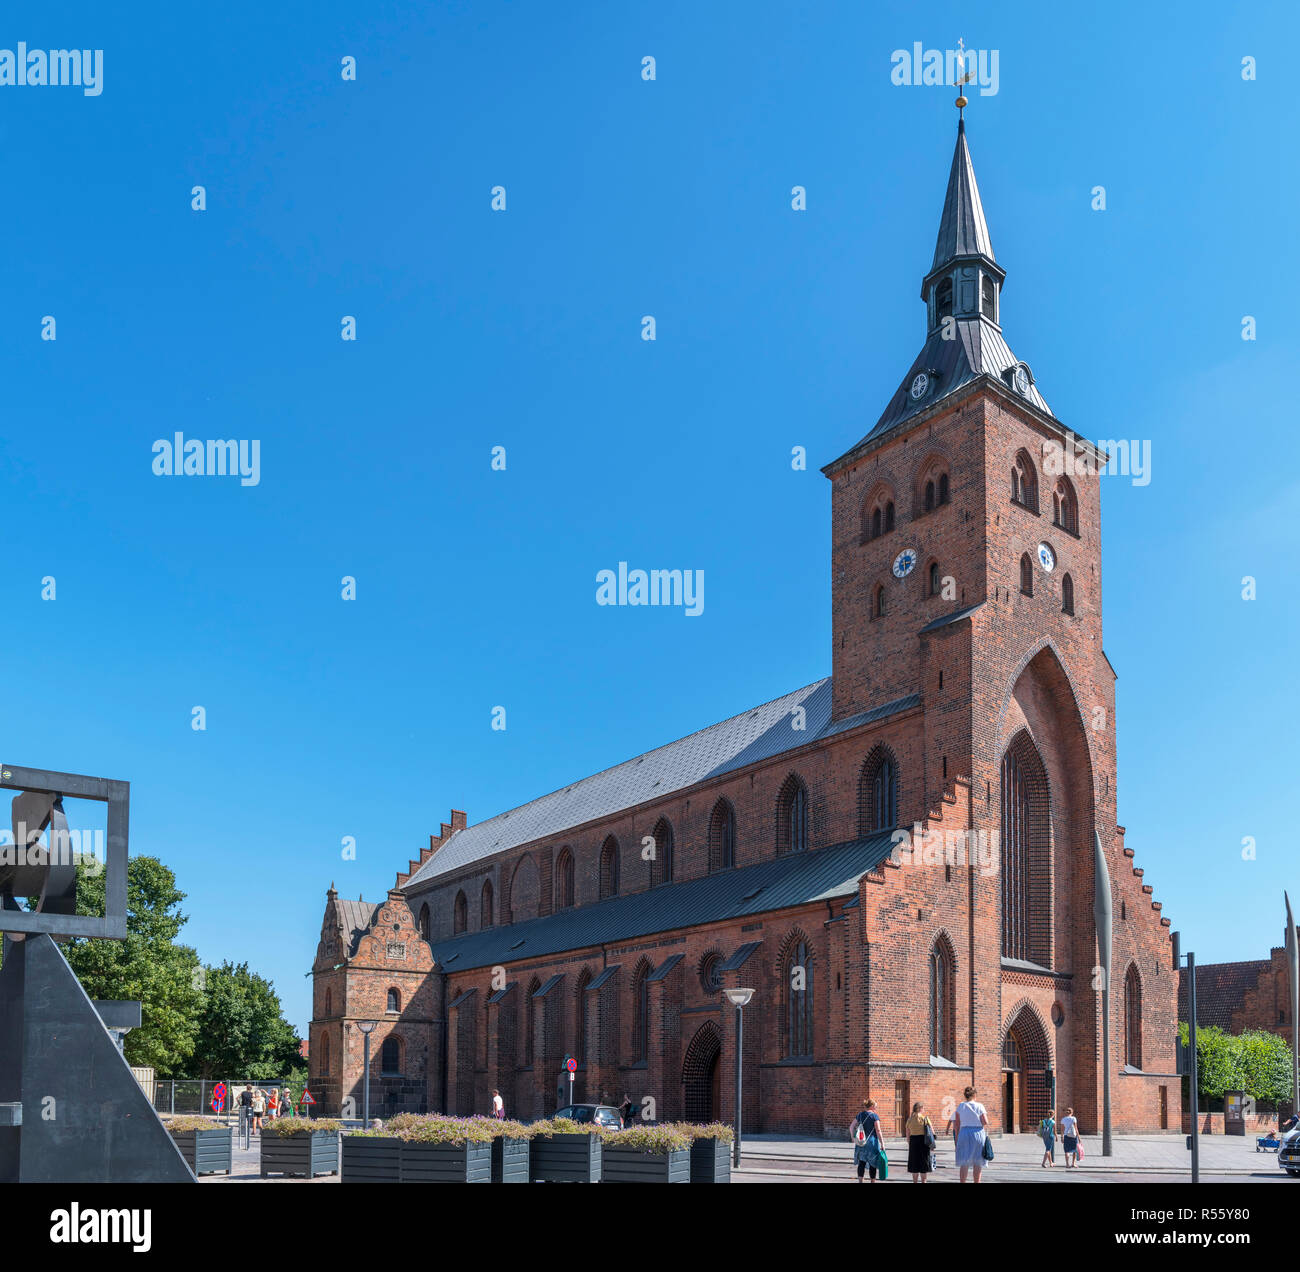 St Canute's Cathedral (Sankt Knuds Kirke), Odense, Funen, Denmark Stock Photo